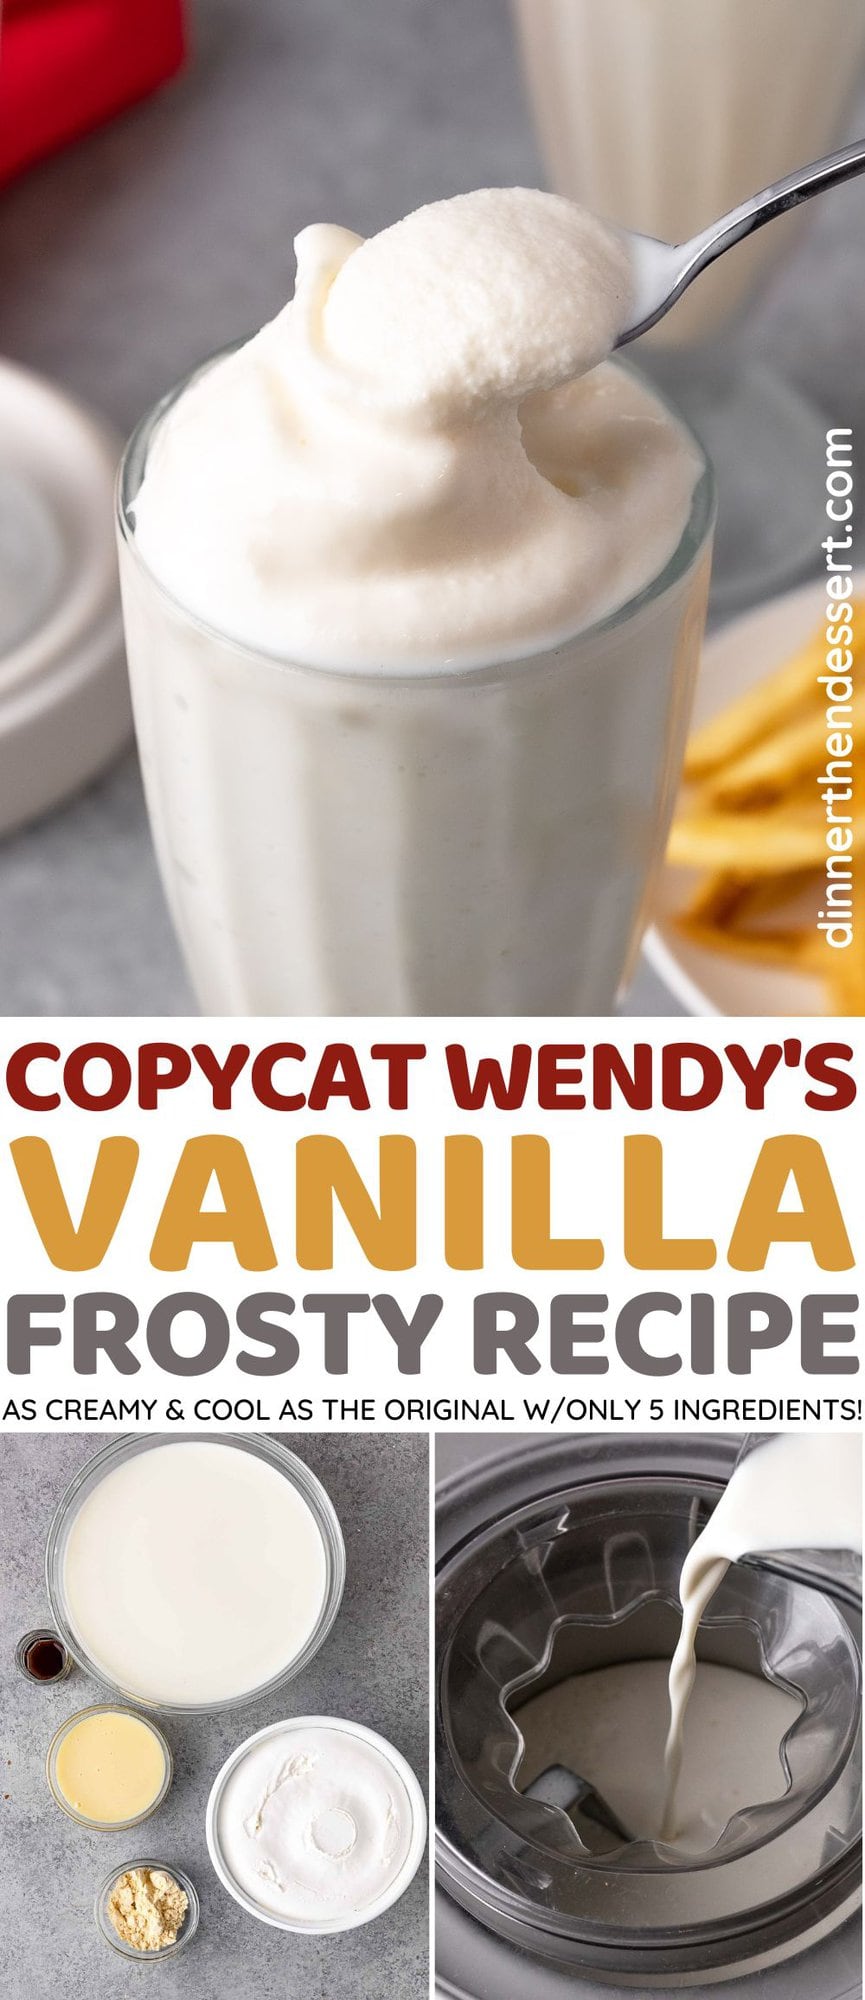 Wendys Vanilla Frosty in a milkshake glass with a spoon and preparation collage